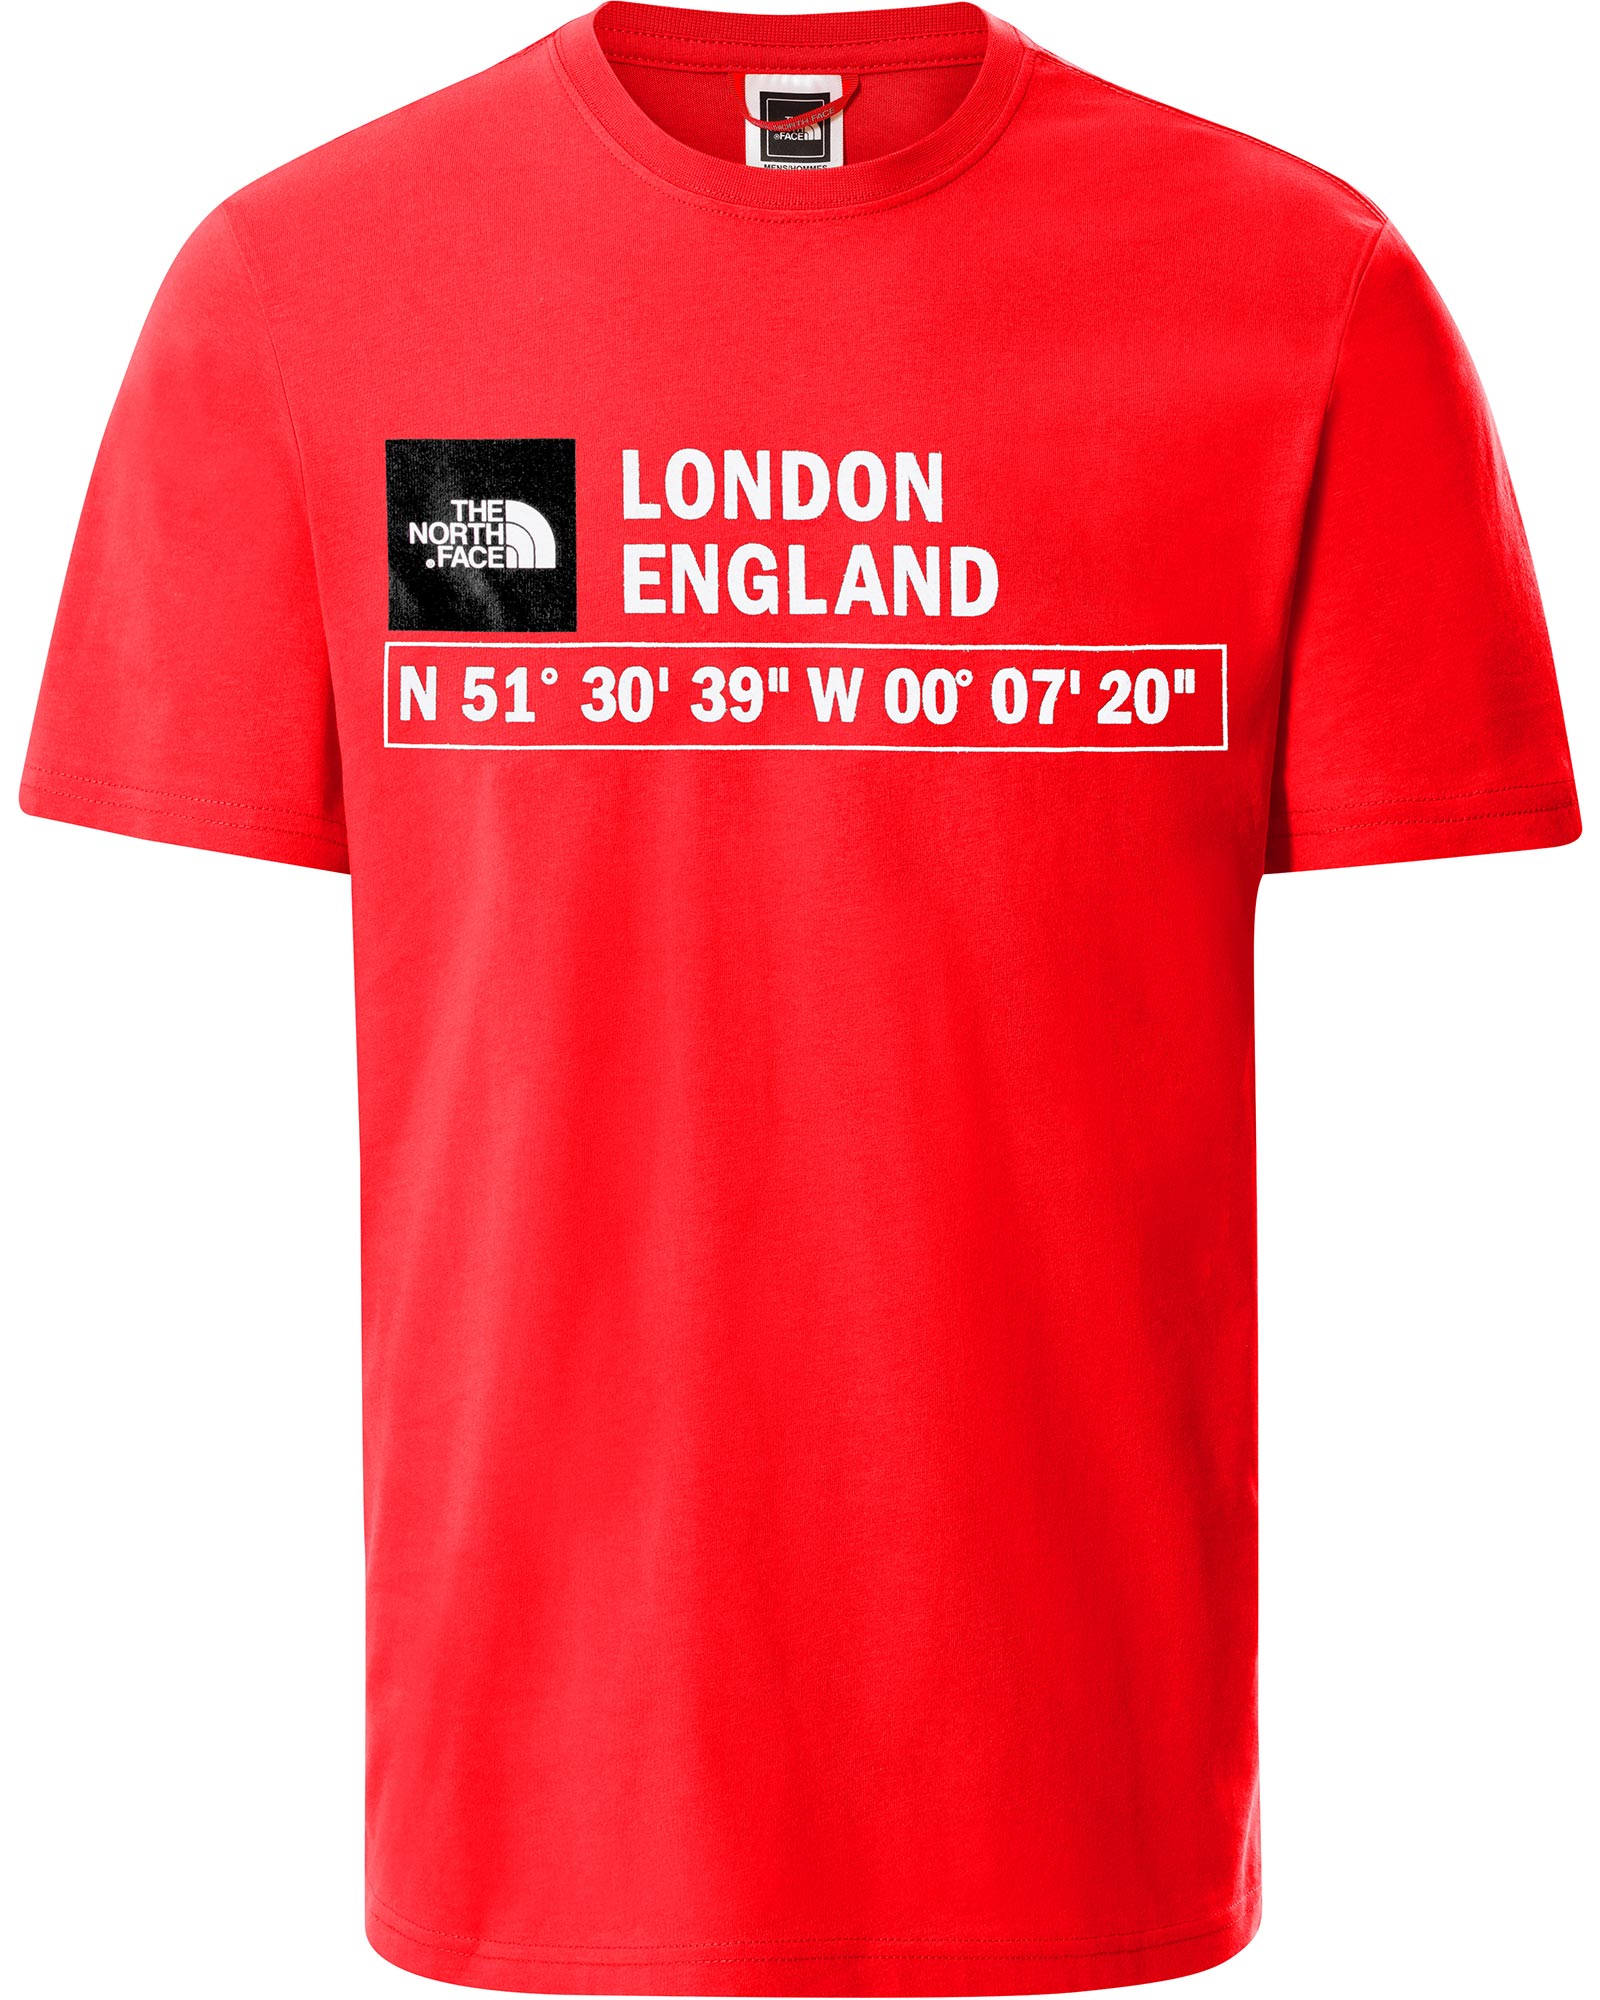 Product image of The North Face London GPS Logo Men's T-Shirt